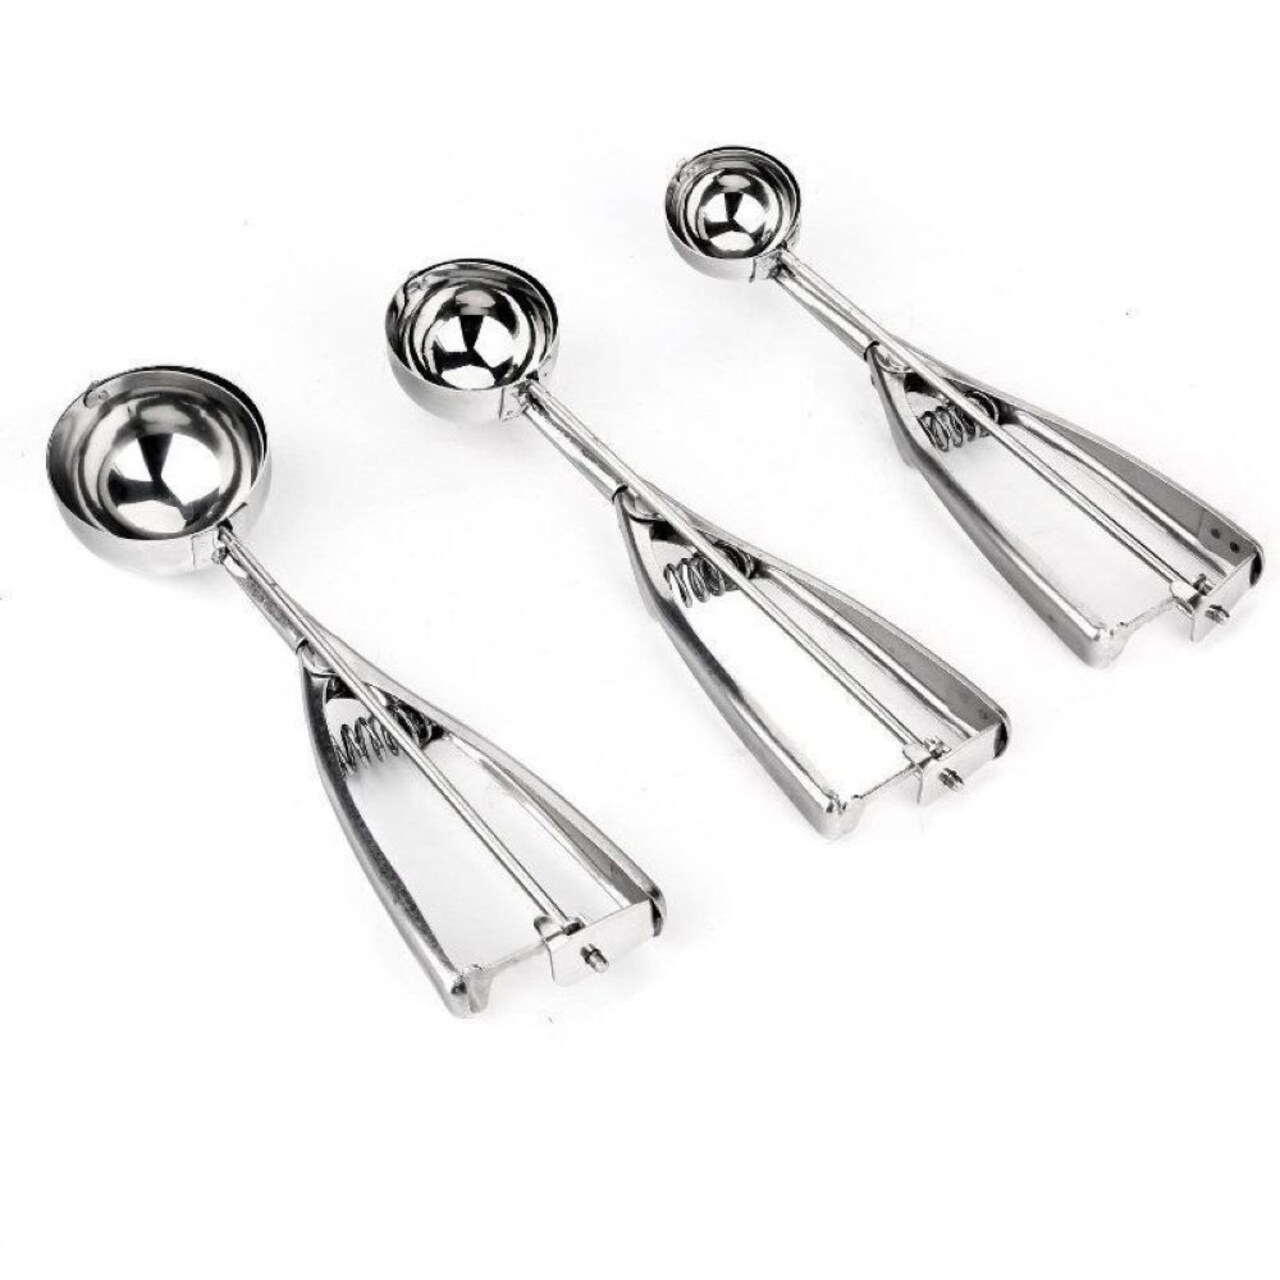 Kitcheniva Stainless Steel Ice Cream Scoops With Trigger Handle